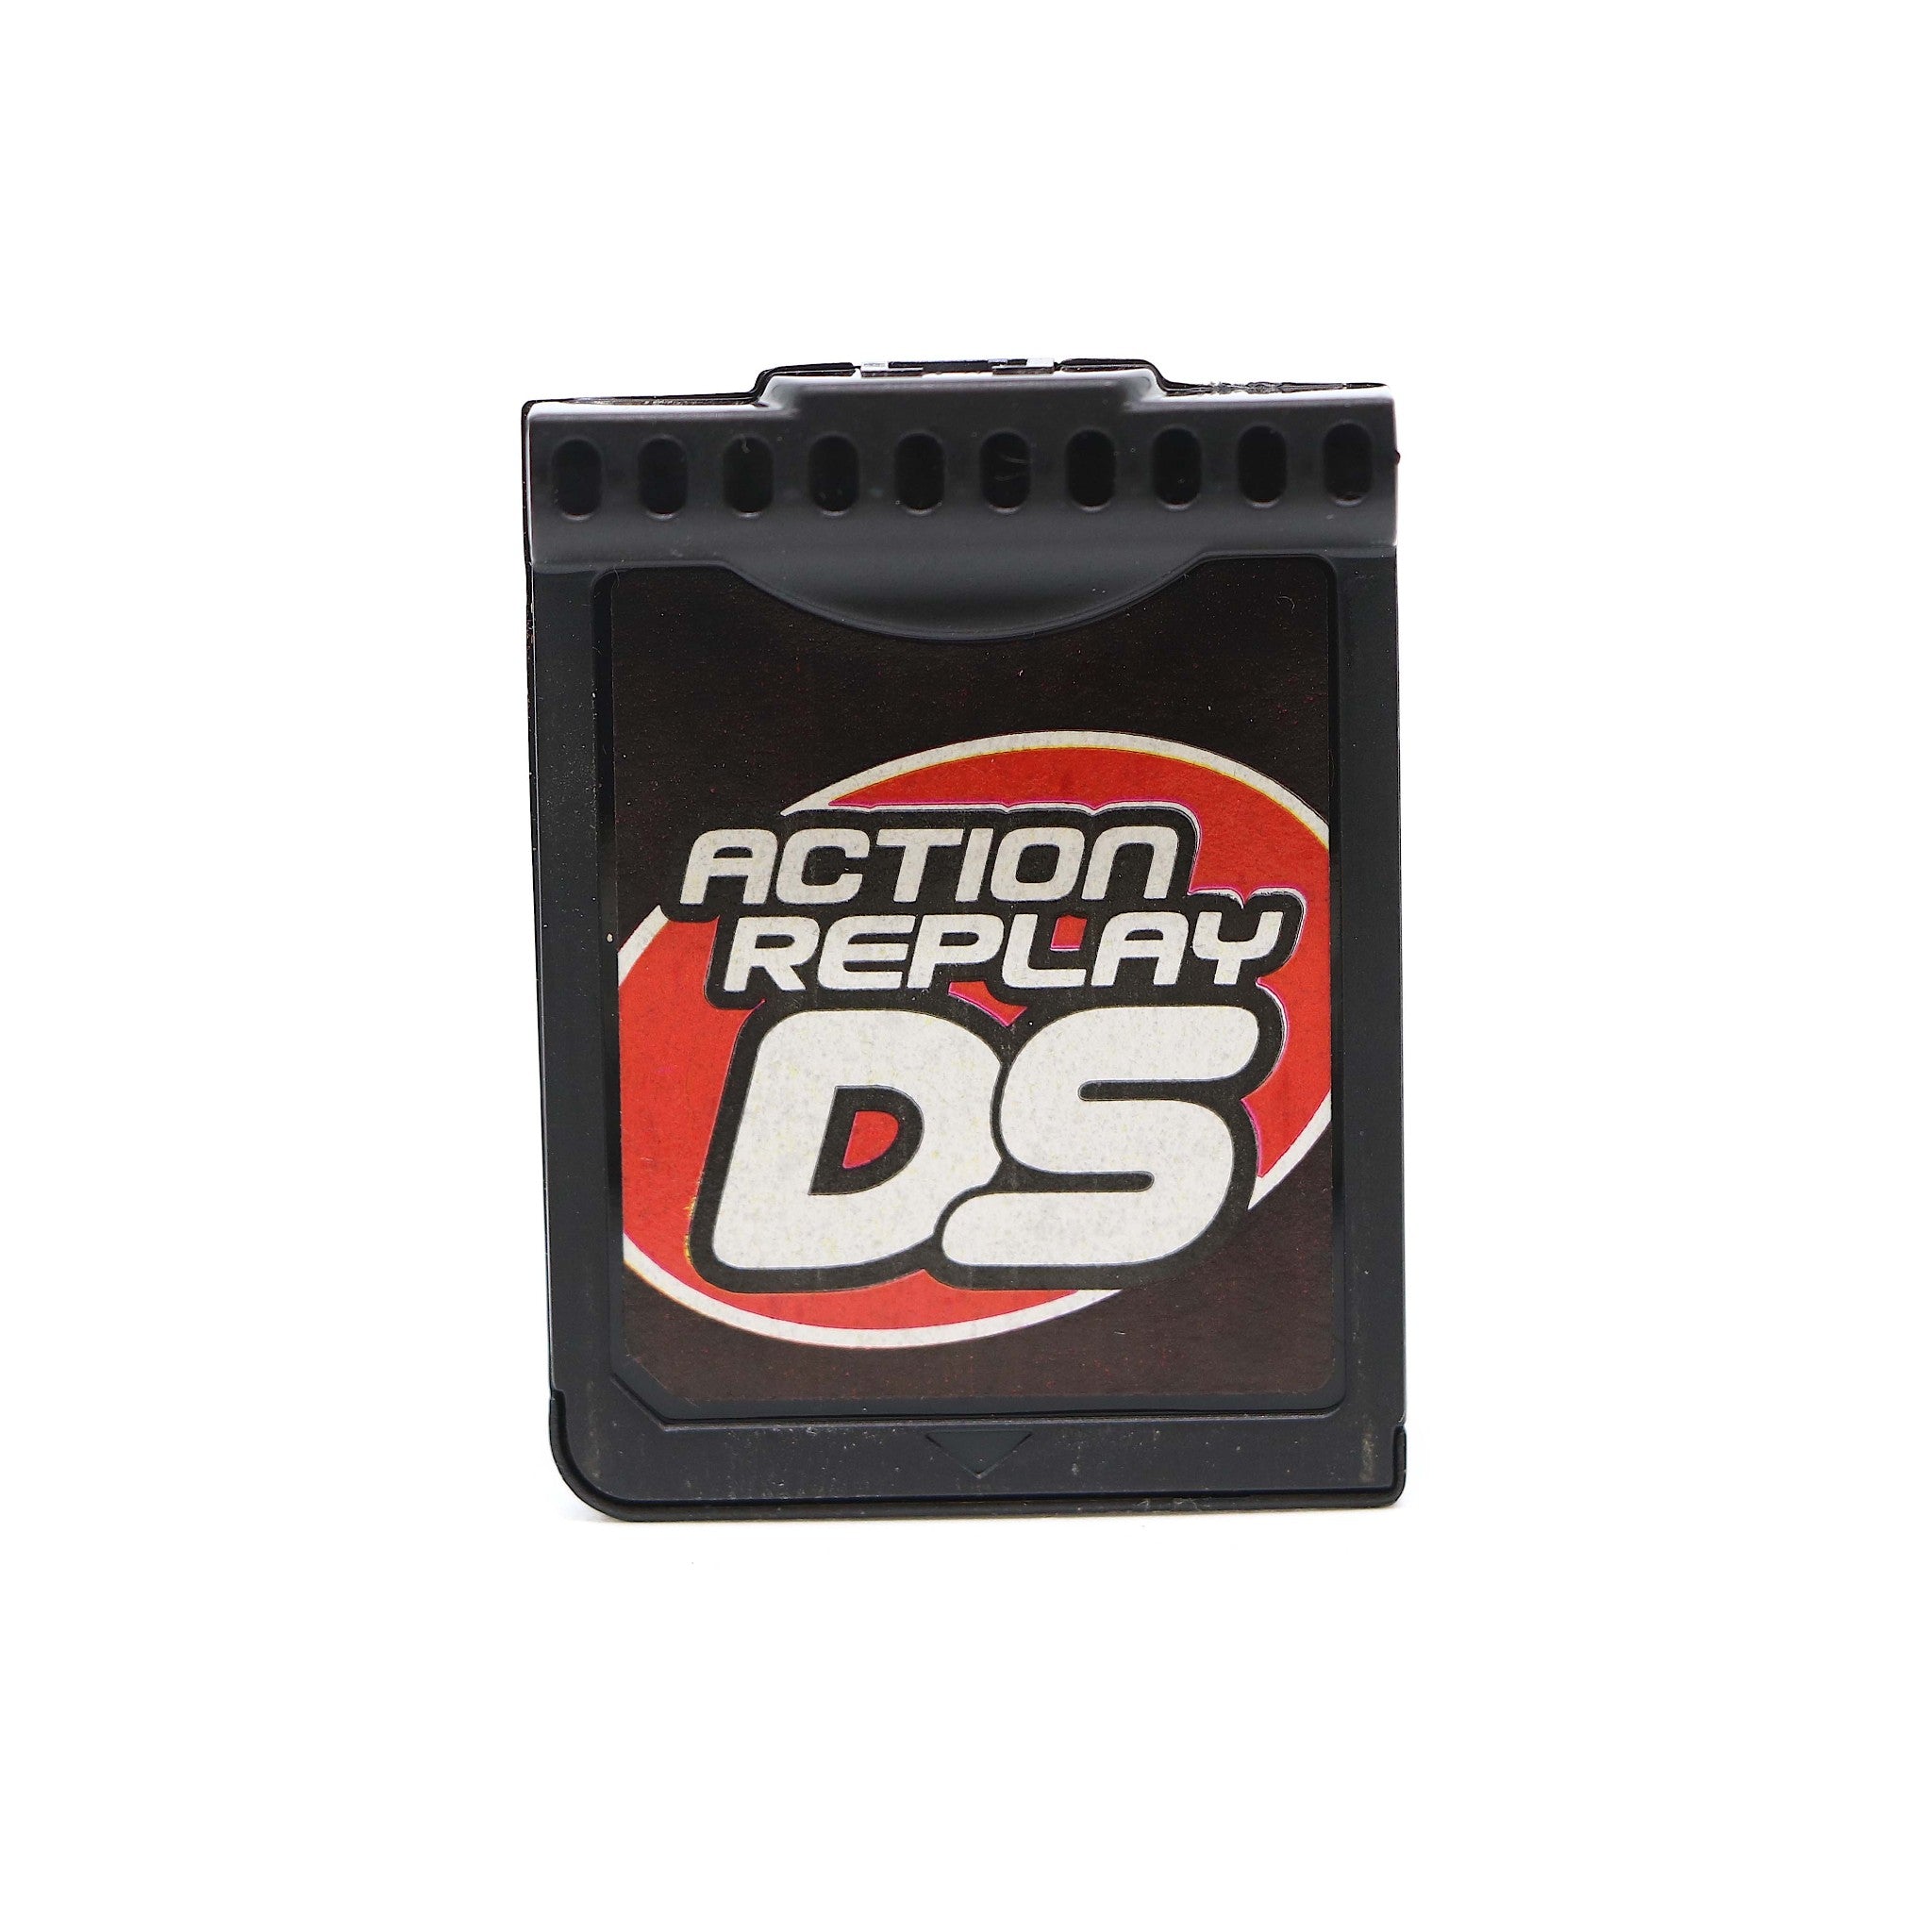 Action Replay Adaptor & USB for Nintendo DS & DS Lite | by Datel In Pack